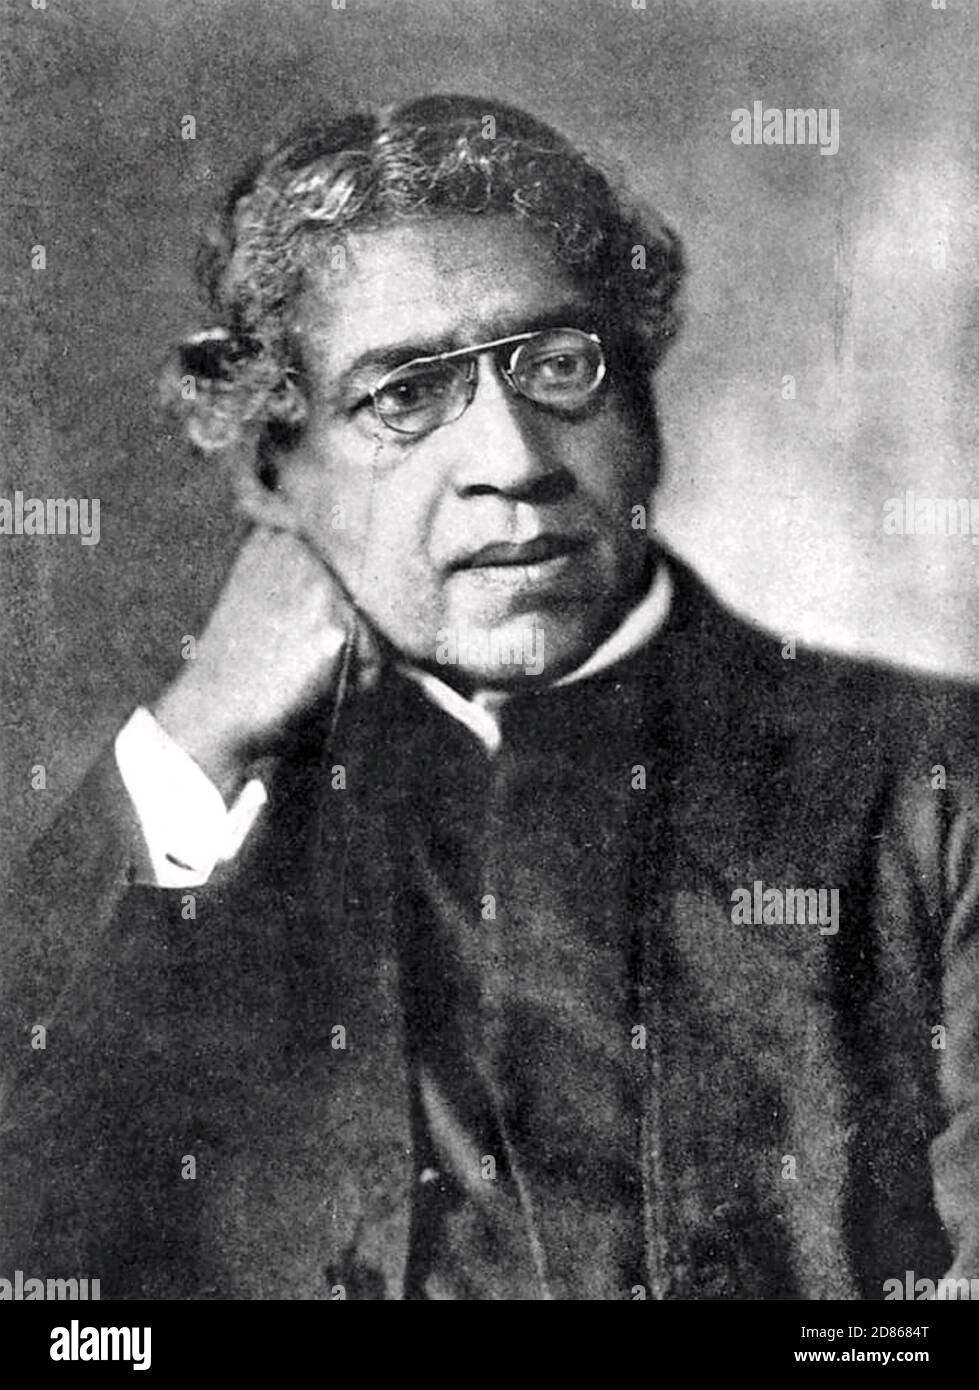 Amrita School of Biotechnology  Bose was the person who first demonstrated  the science behind capturing radio waves He is known as the father of  wireless communication Wondering how he is not